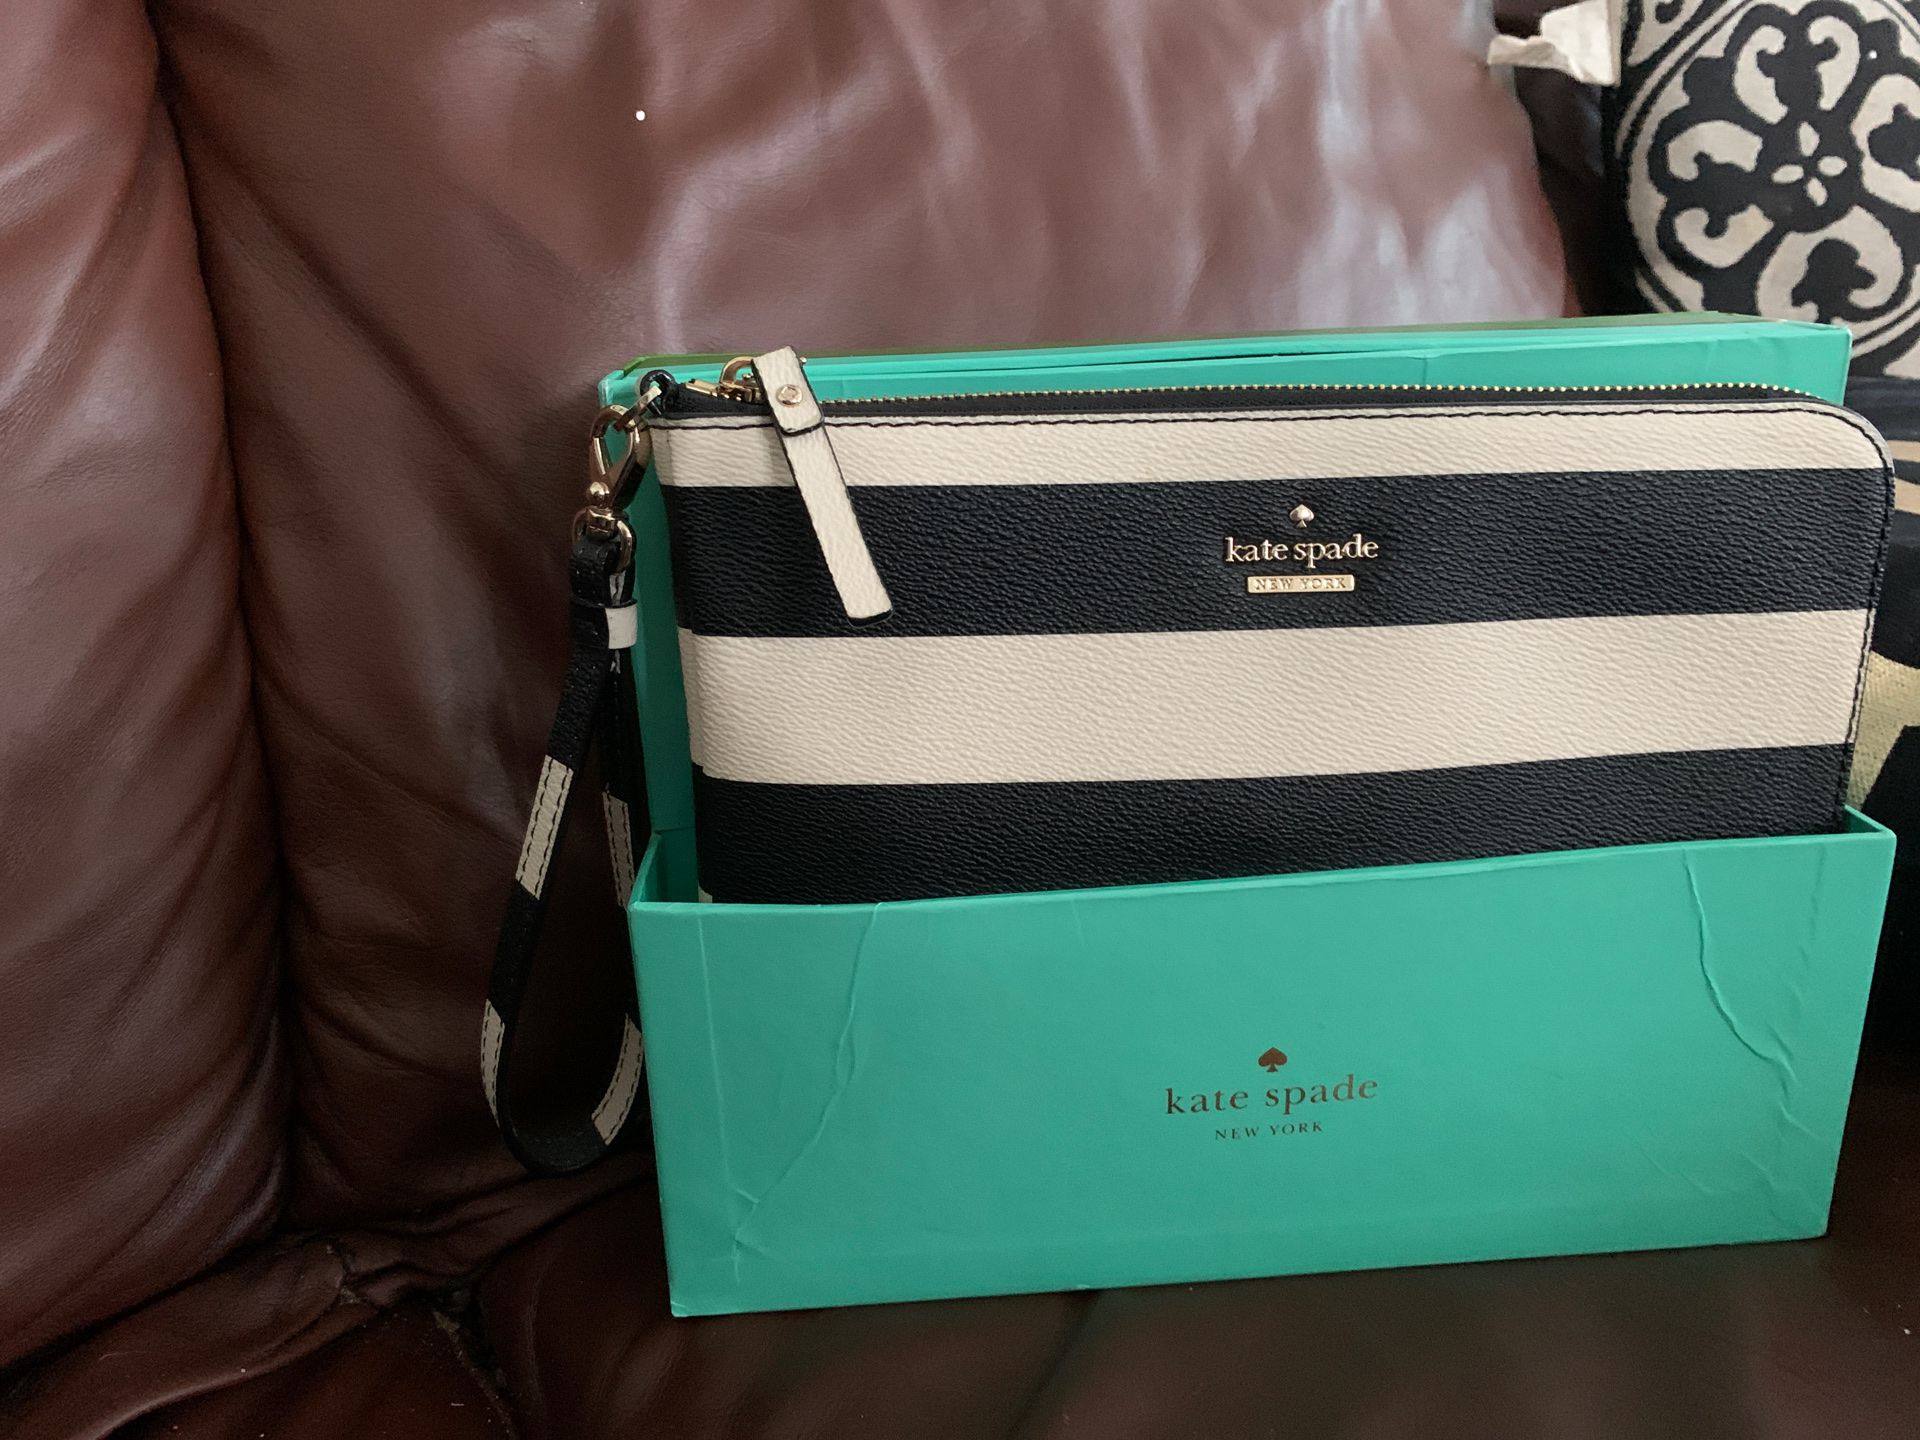 Kate spade everpurse charges phones